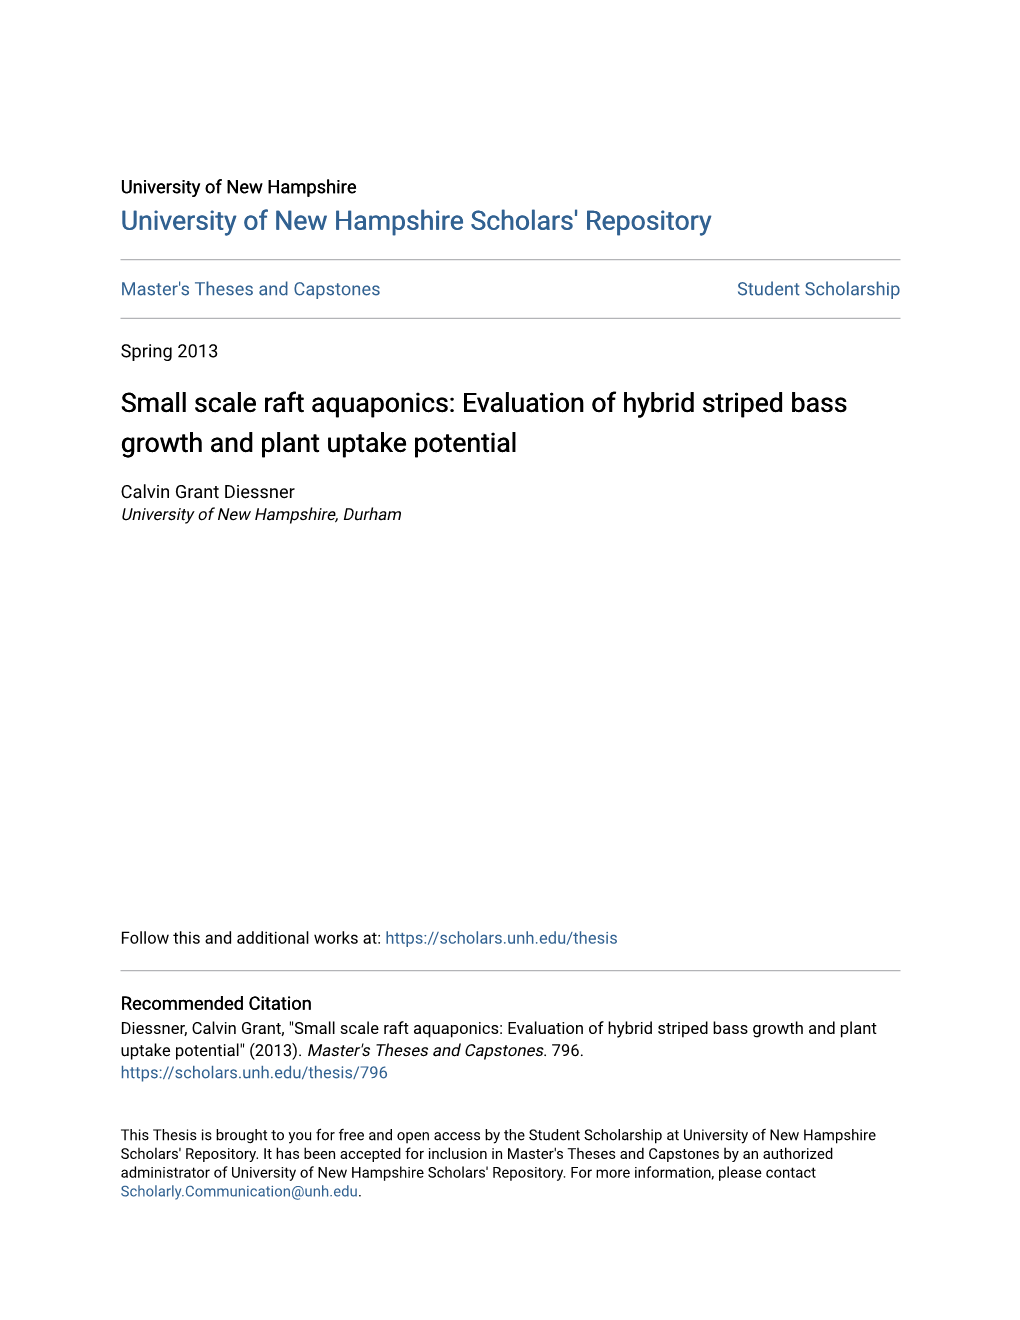 Small Scale Raft Aquaponics: Evaluation of Hybrid Striped Bass Growth and Plant Uptake Potential